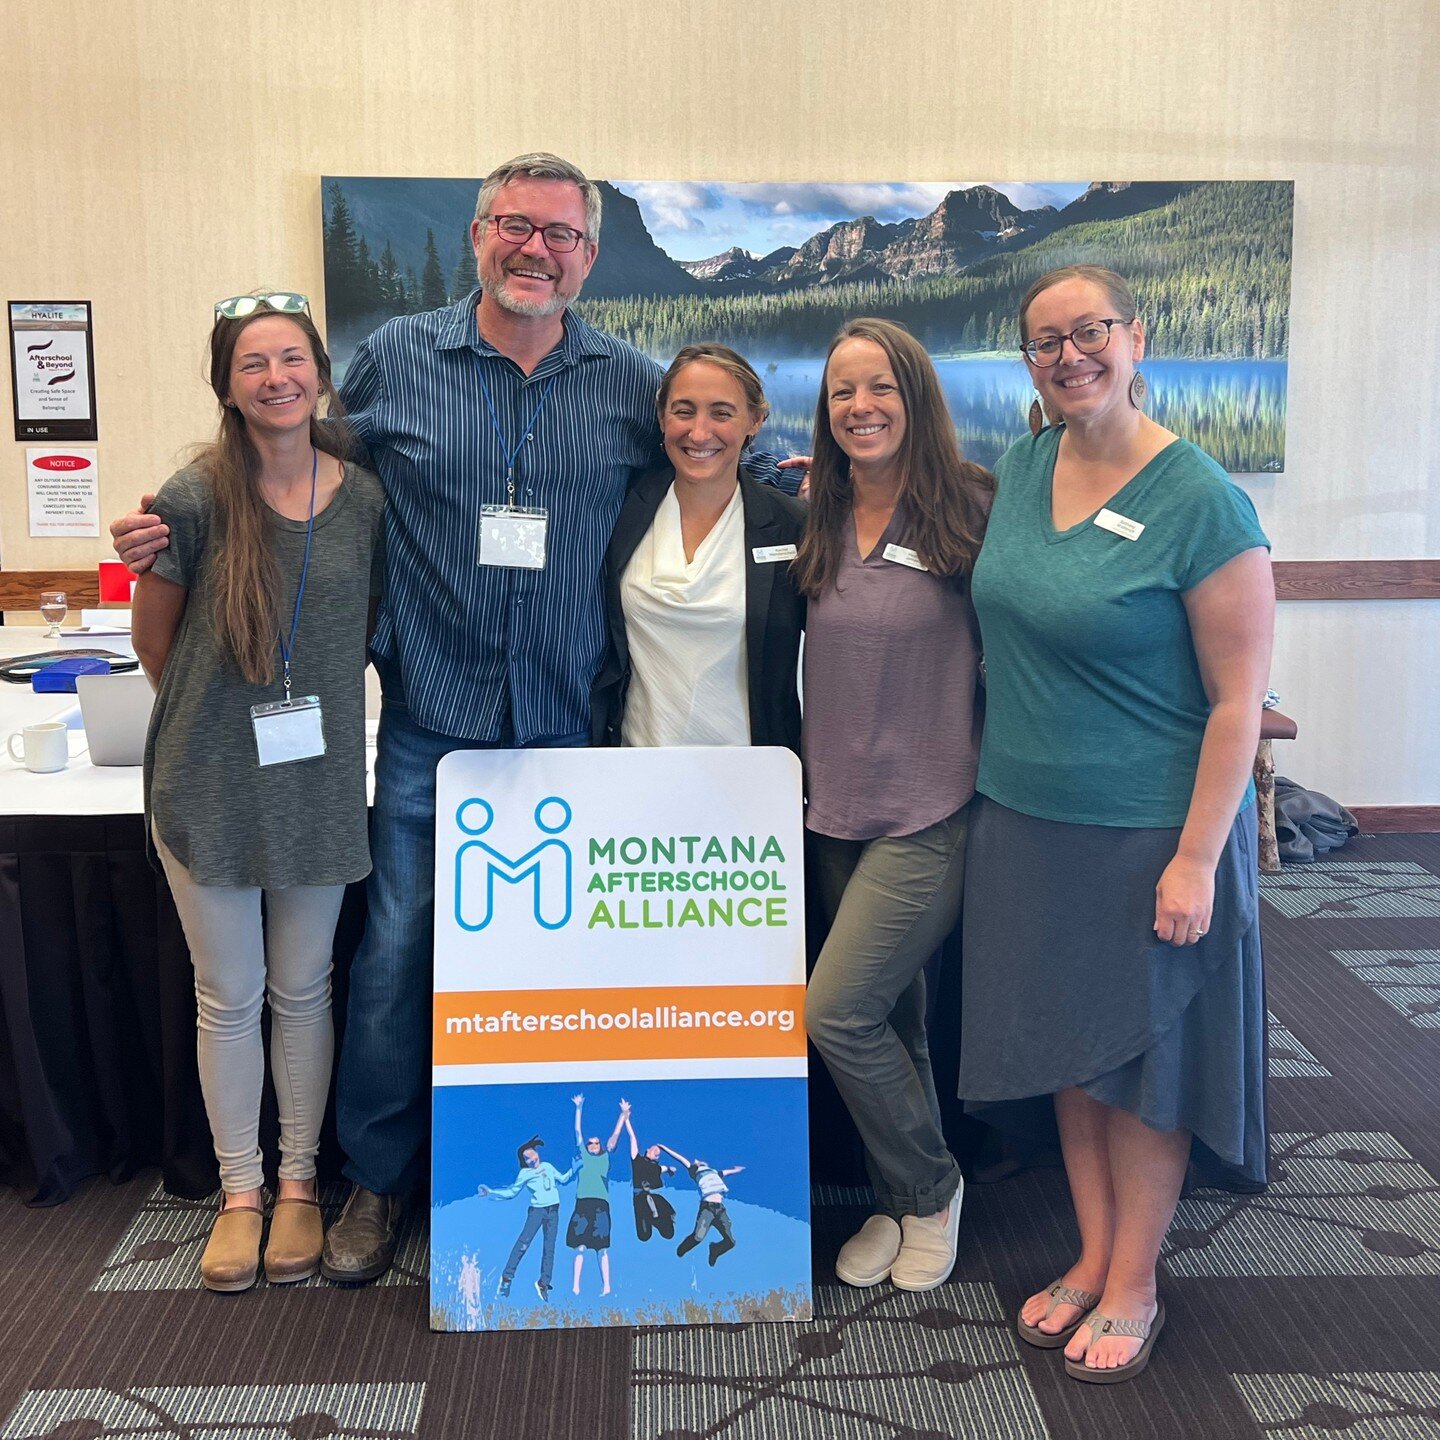 Days 2 &amp; 3 of Afterschool &amp; Beyond were a success! A special thank you to all of our sponsors, presenters, and participants for making this year's conference so great!
&bull;
If you attended, please fill out our conference evaluation via the 